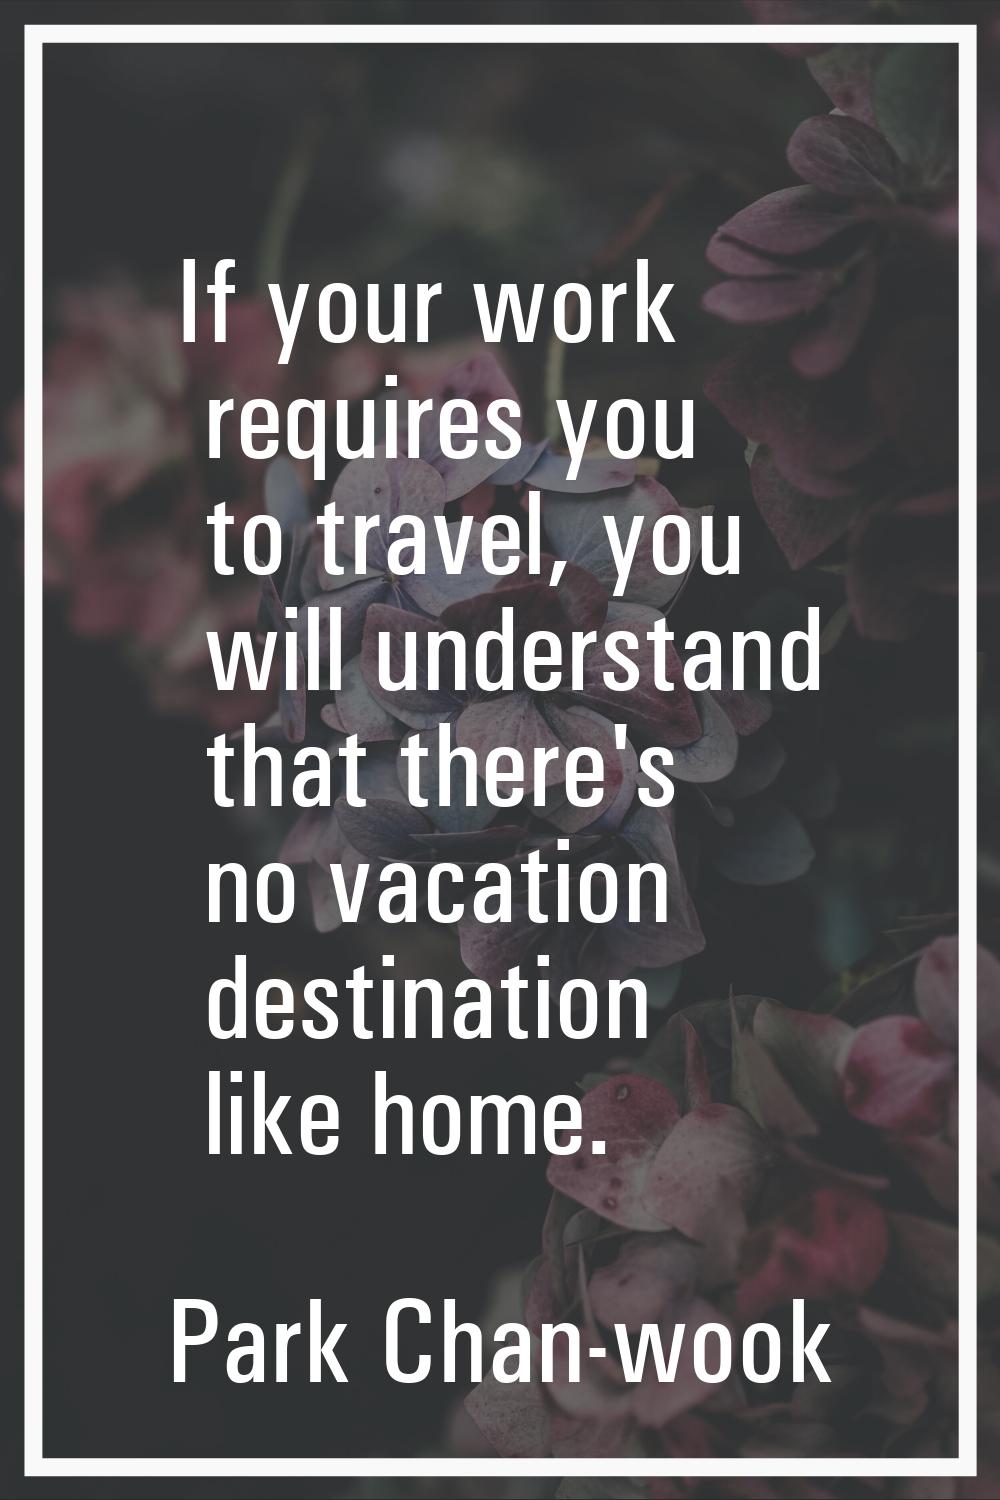 If your work requires you to travel, you will understand that there's no vacation destination like 